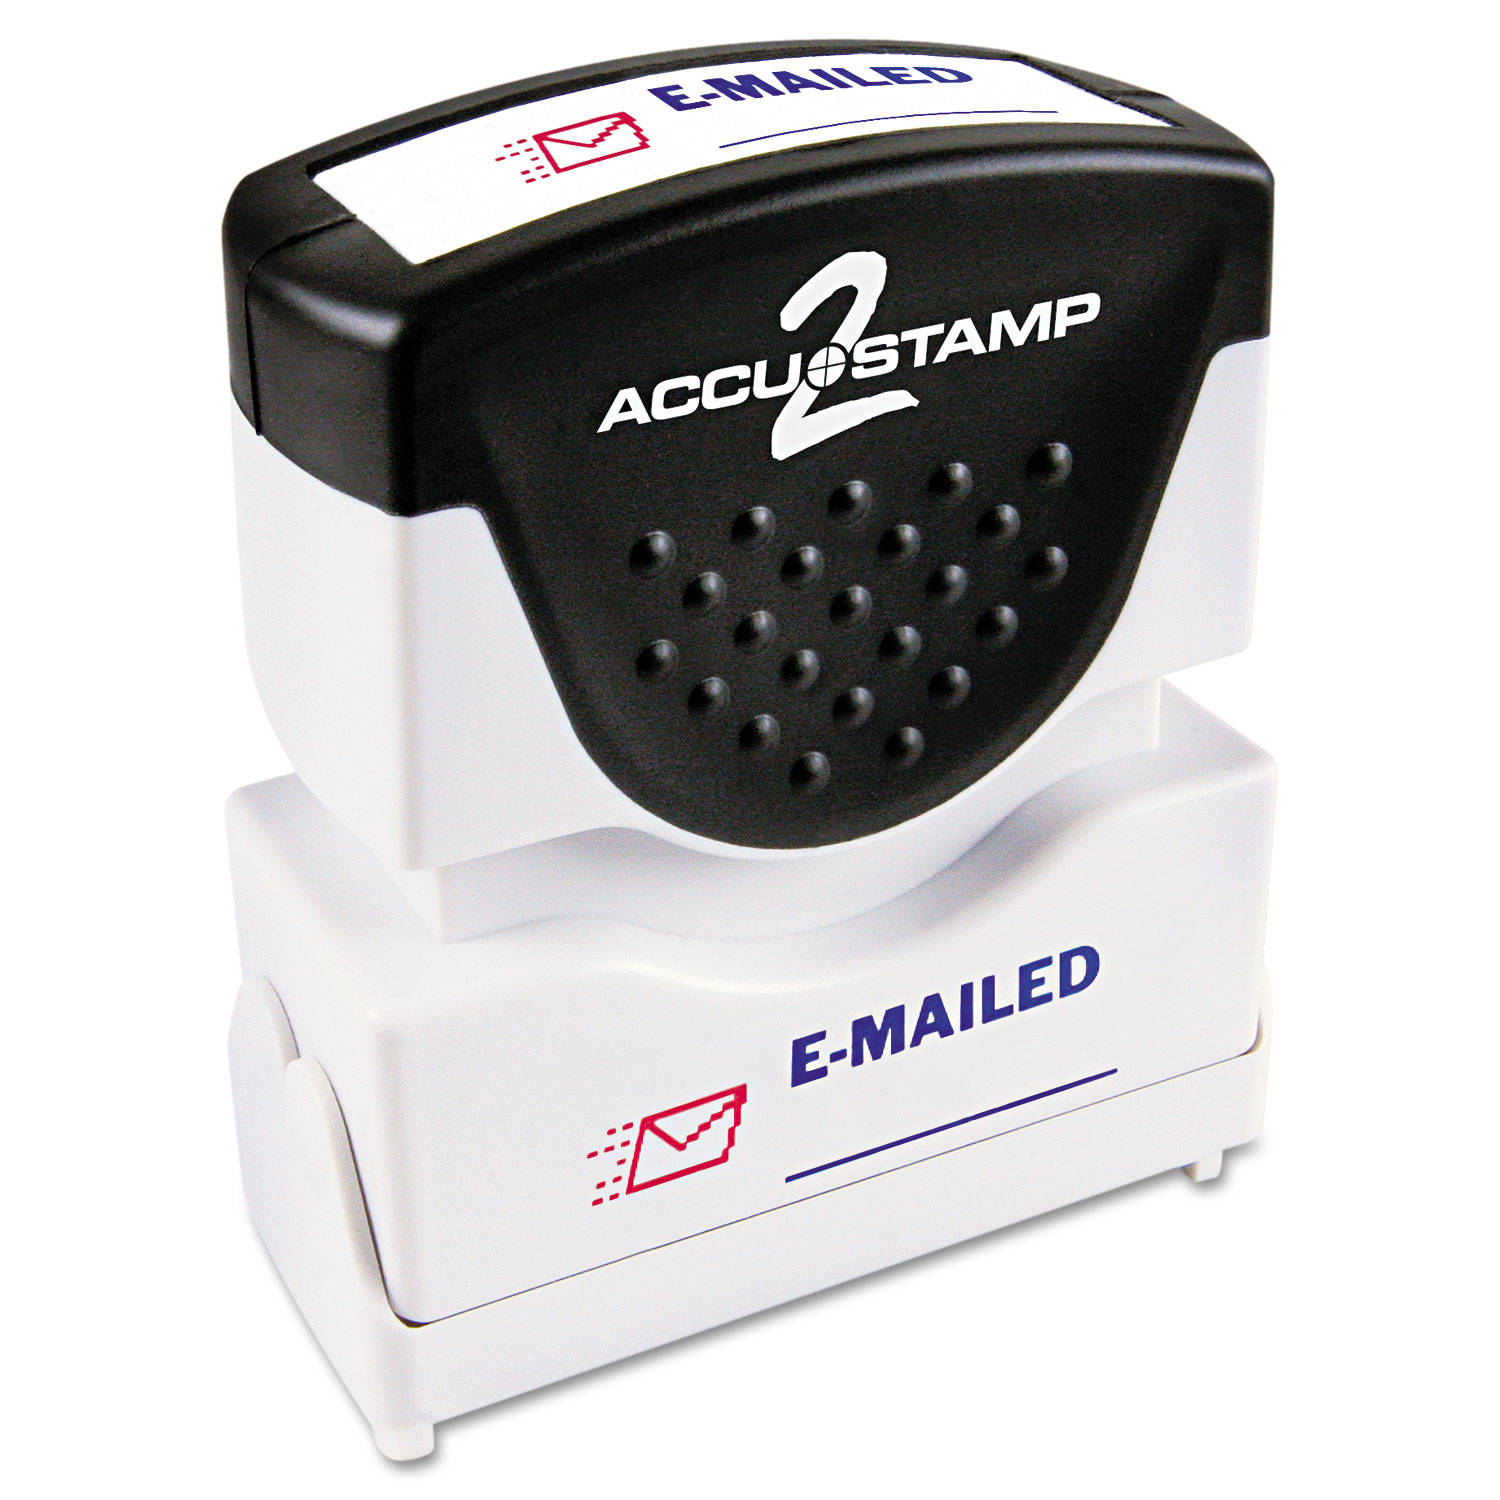  ACCUSTAMP2 035541 Pre-Inked Shutter Stamp, Red/Blue, EMAILED, 1 5/8 x 1/2 (COS035541) 